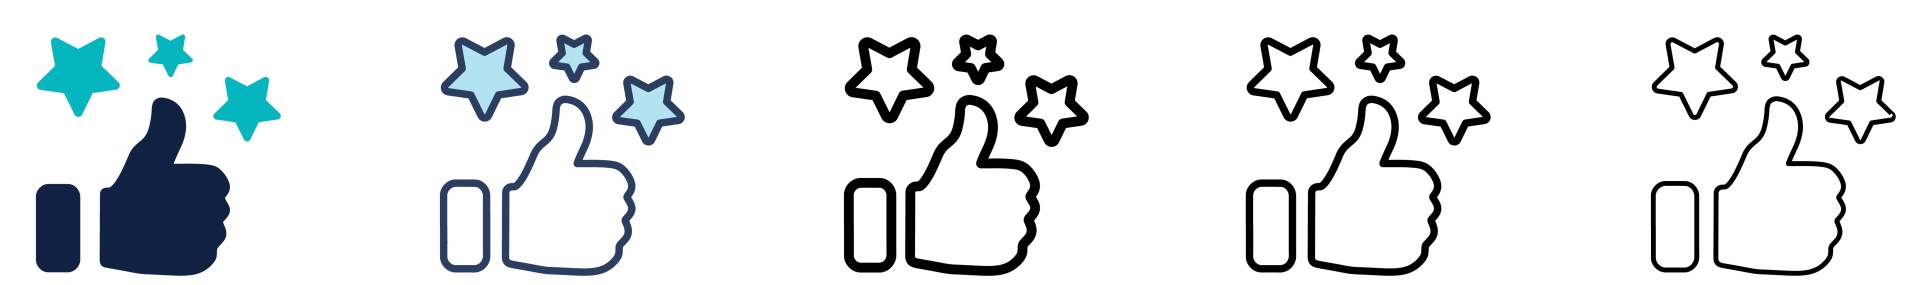 a series of thumbs up icons with stars